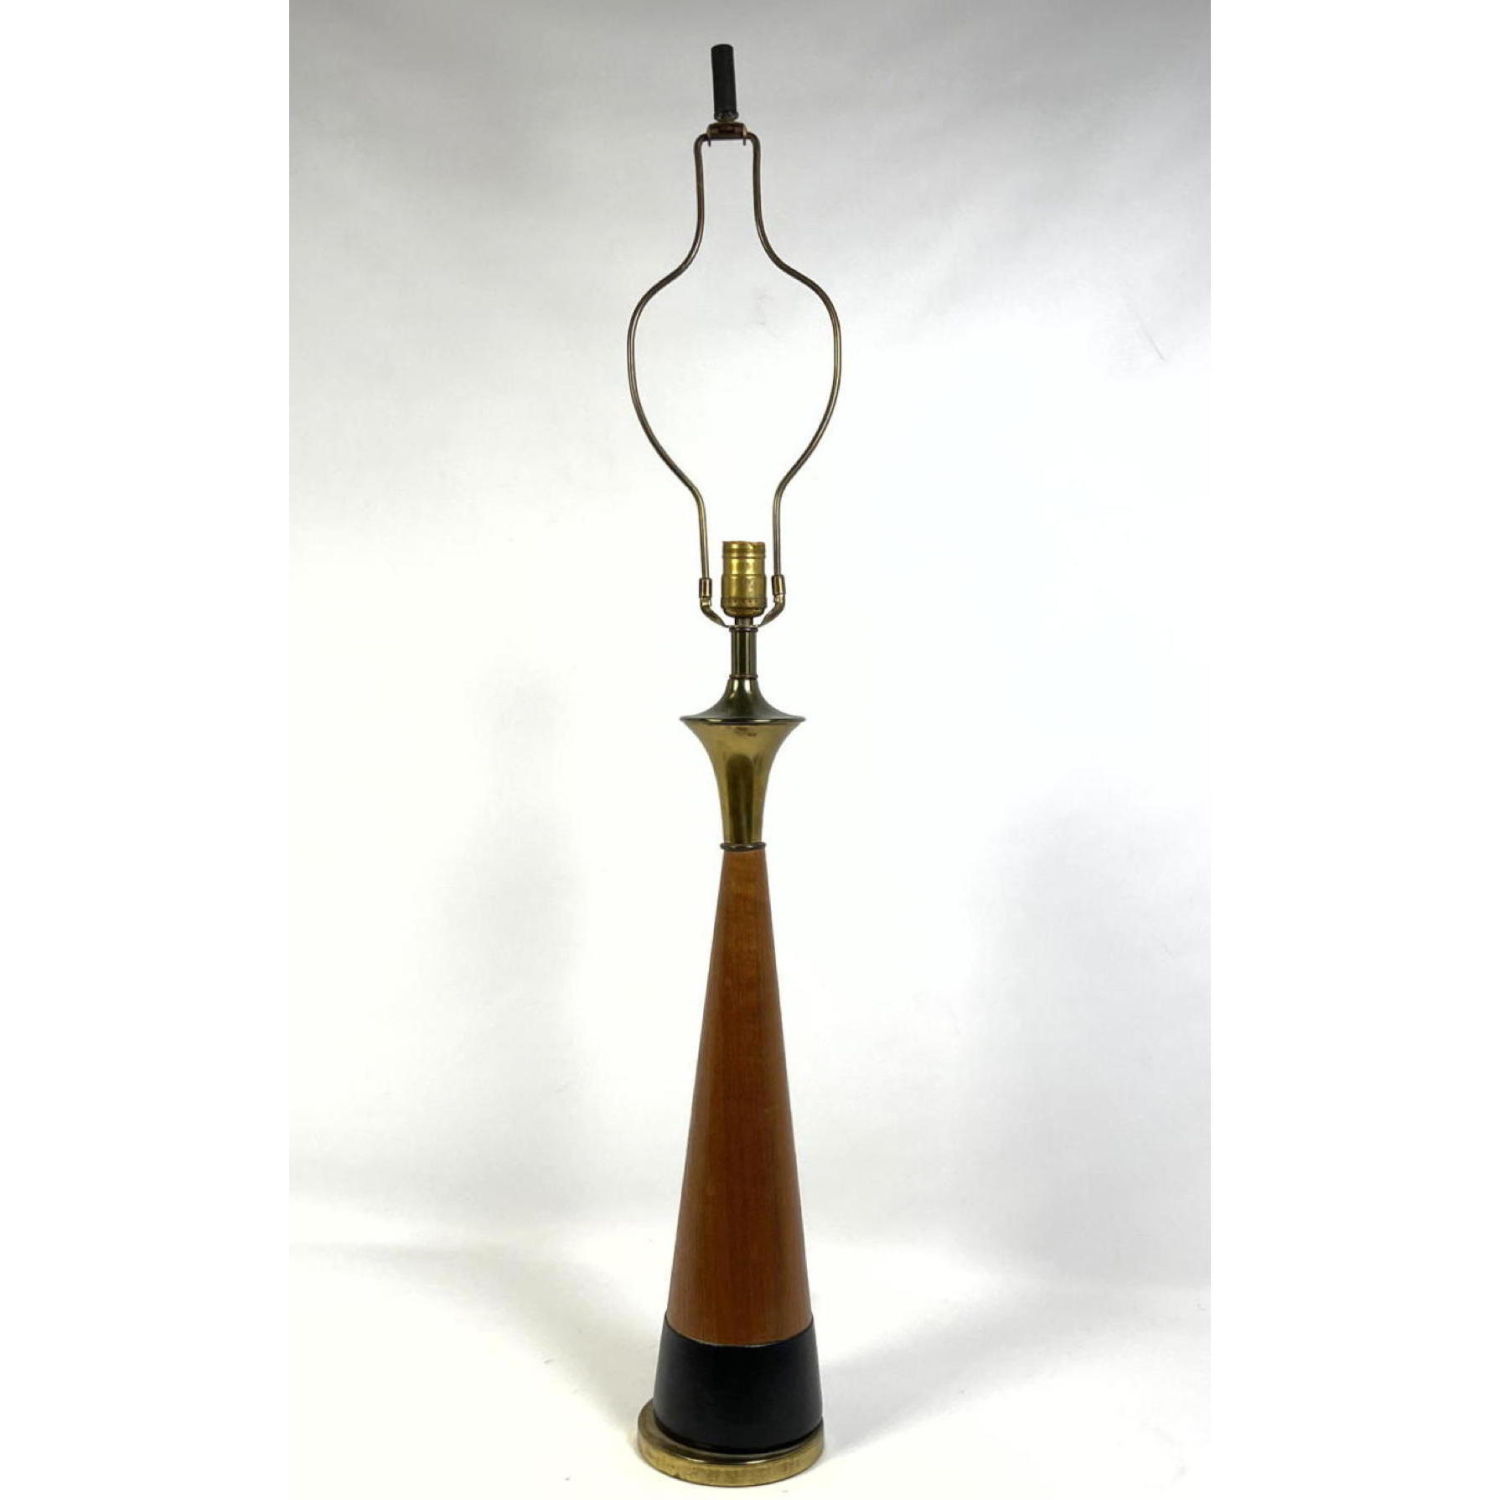 Modernist tapered wood table lamp.